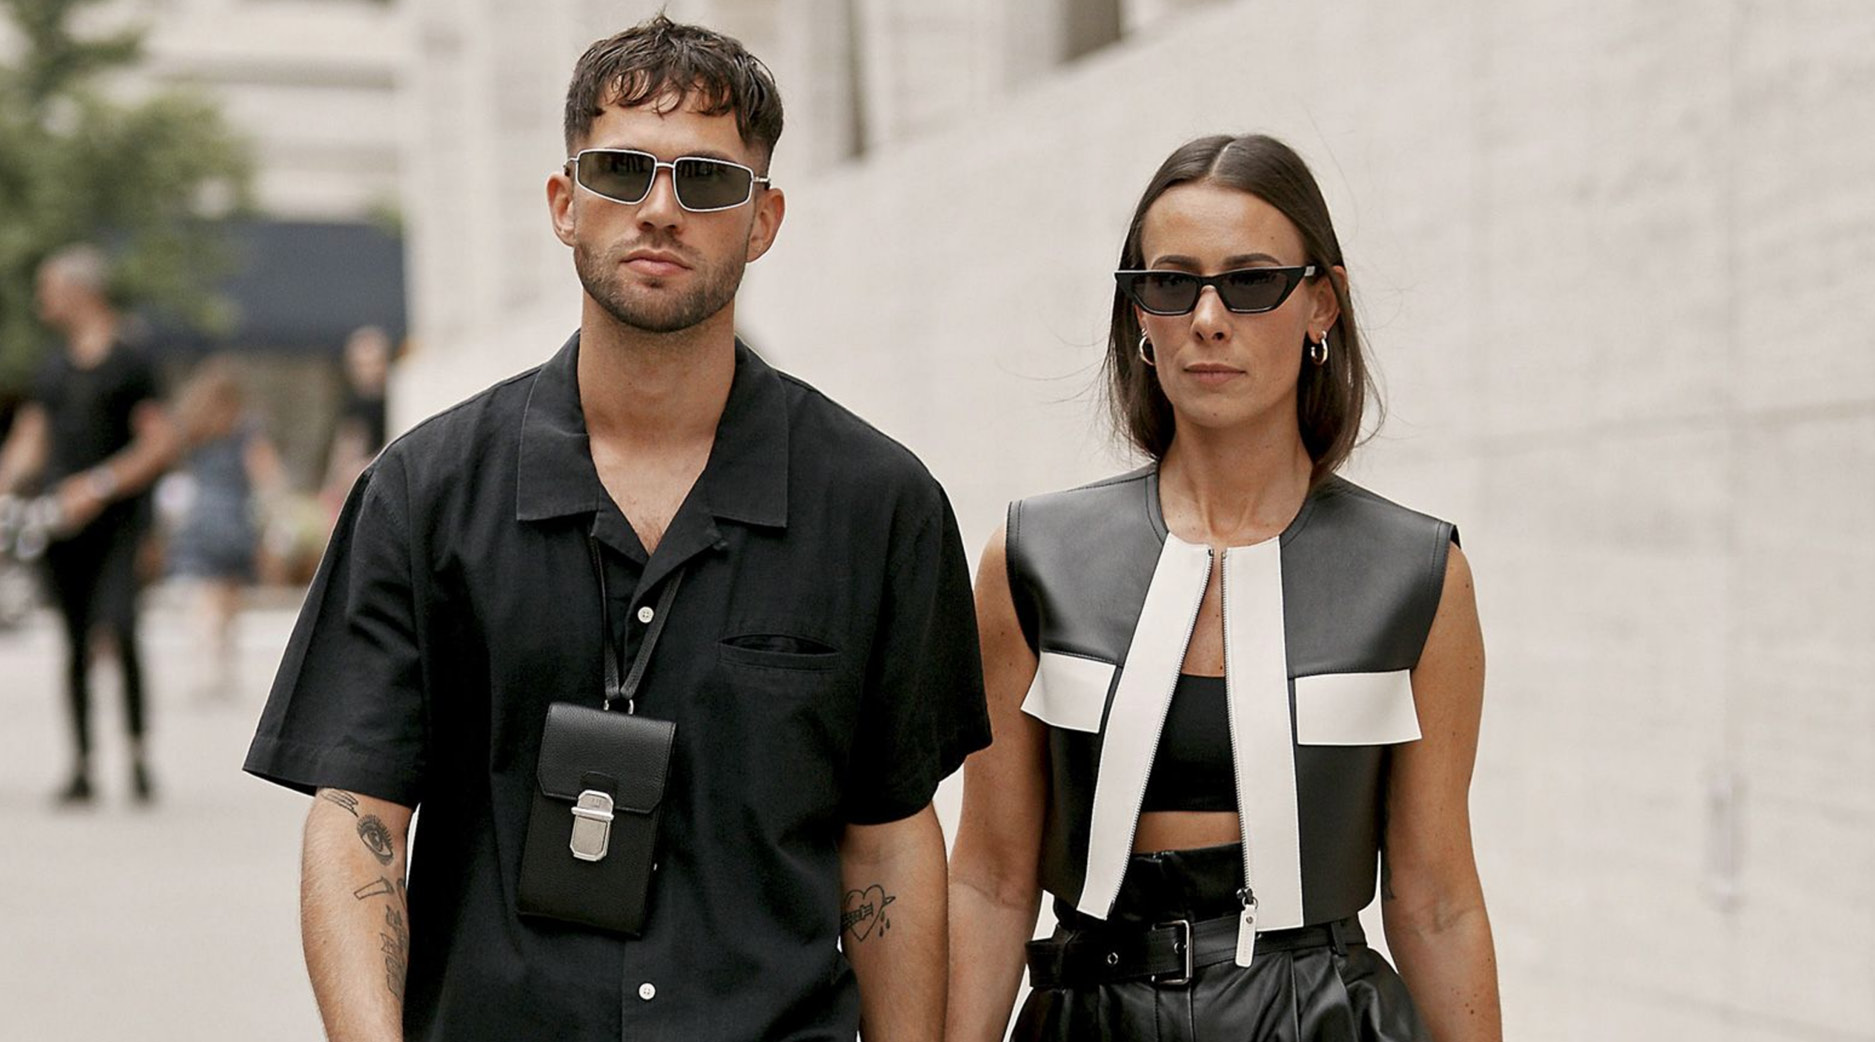 Give your shades an upgrade with these sleek new sunglasses to suit any face